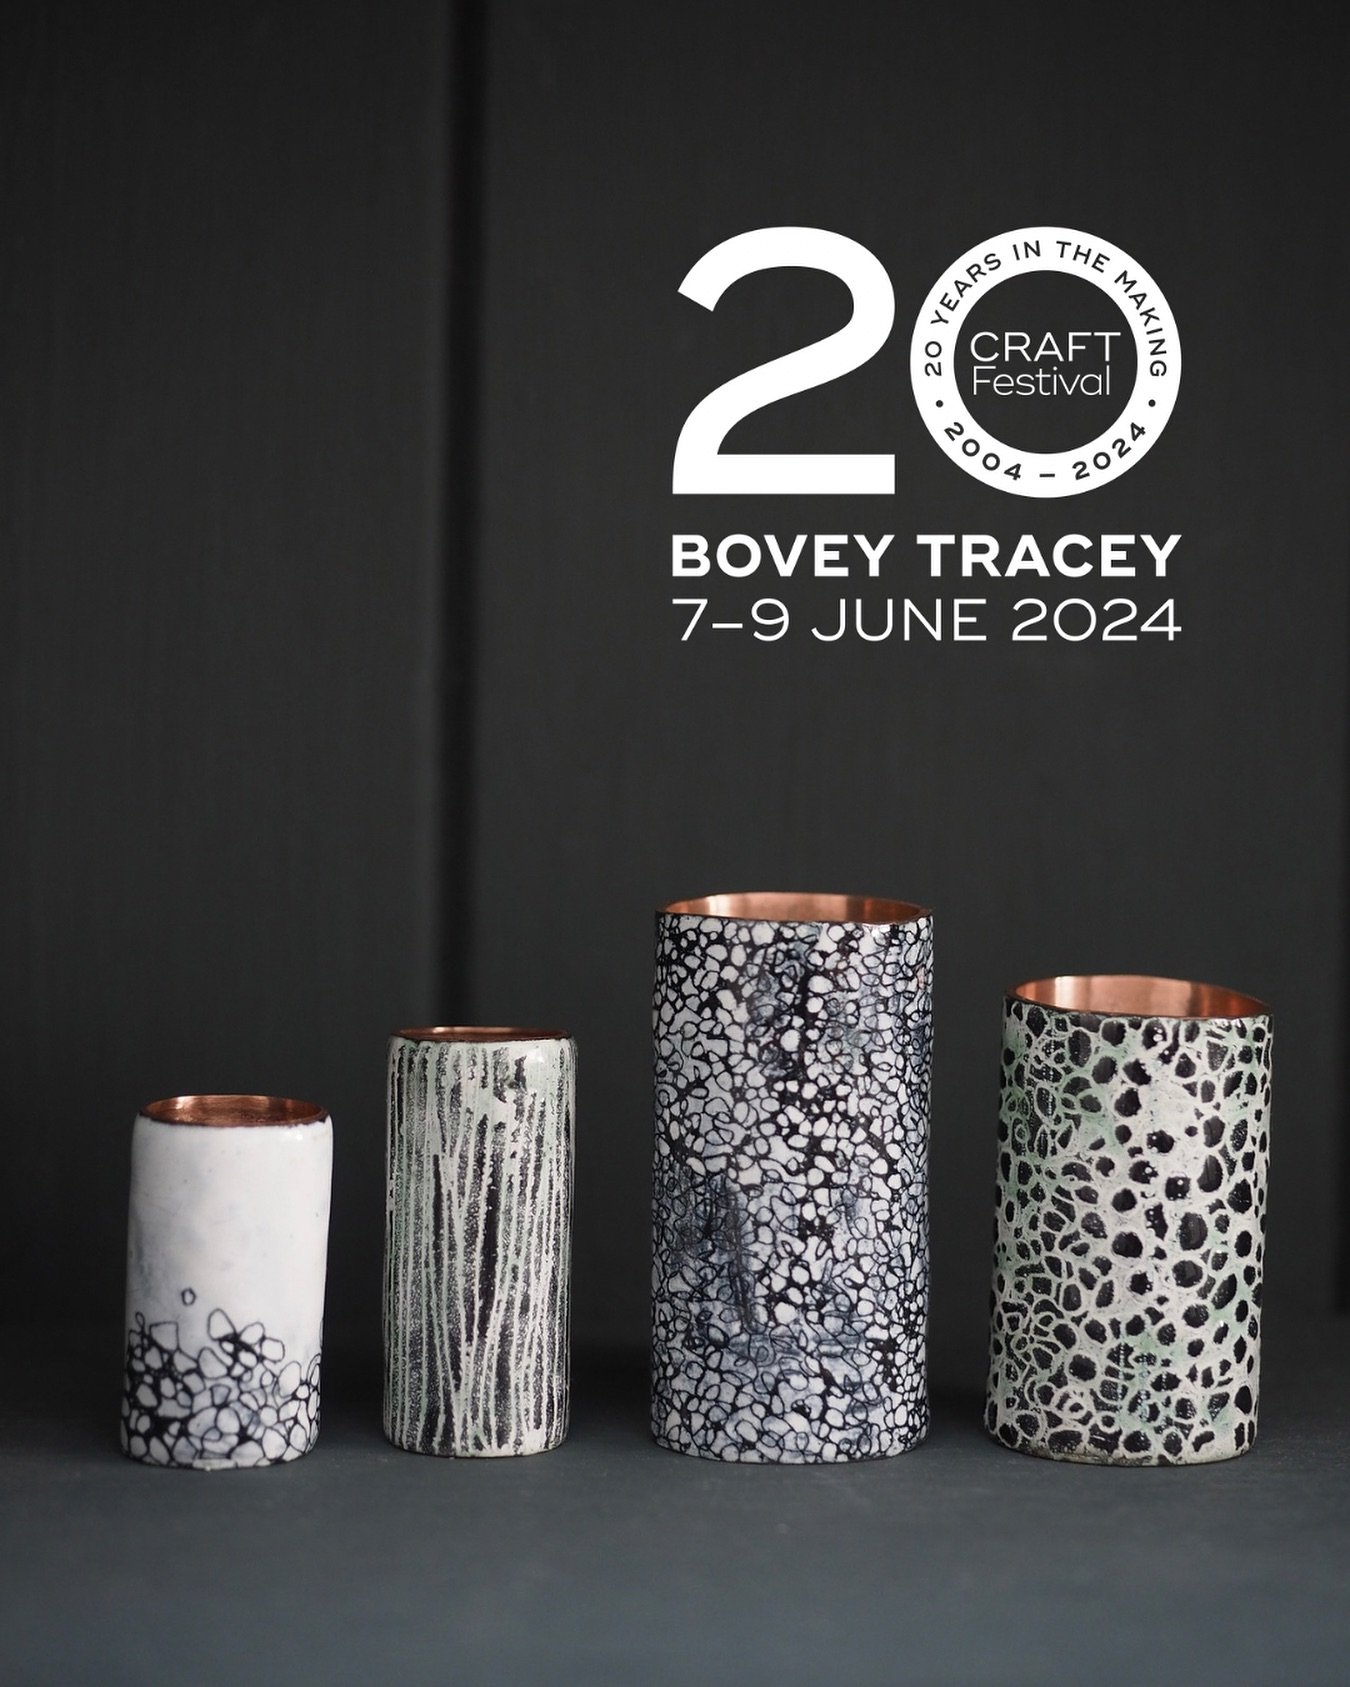 In just over 3 weeks time I&rsquo;ll be heading down to Devon to show my work at @craftfestival Bovey Tracey&rsquo;s 20th anniversary and I cannot wait! I feel so lucky to have been selected to show at this years celebrations. Looking forward to catc